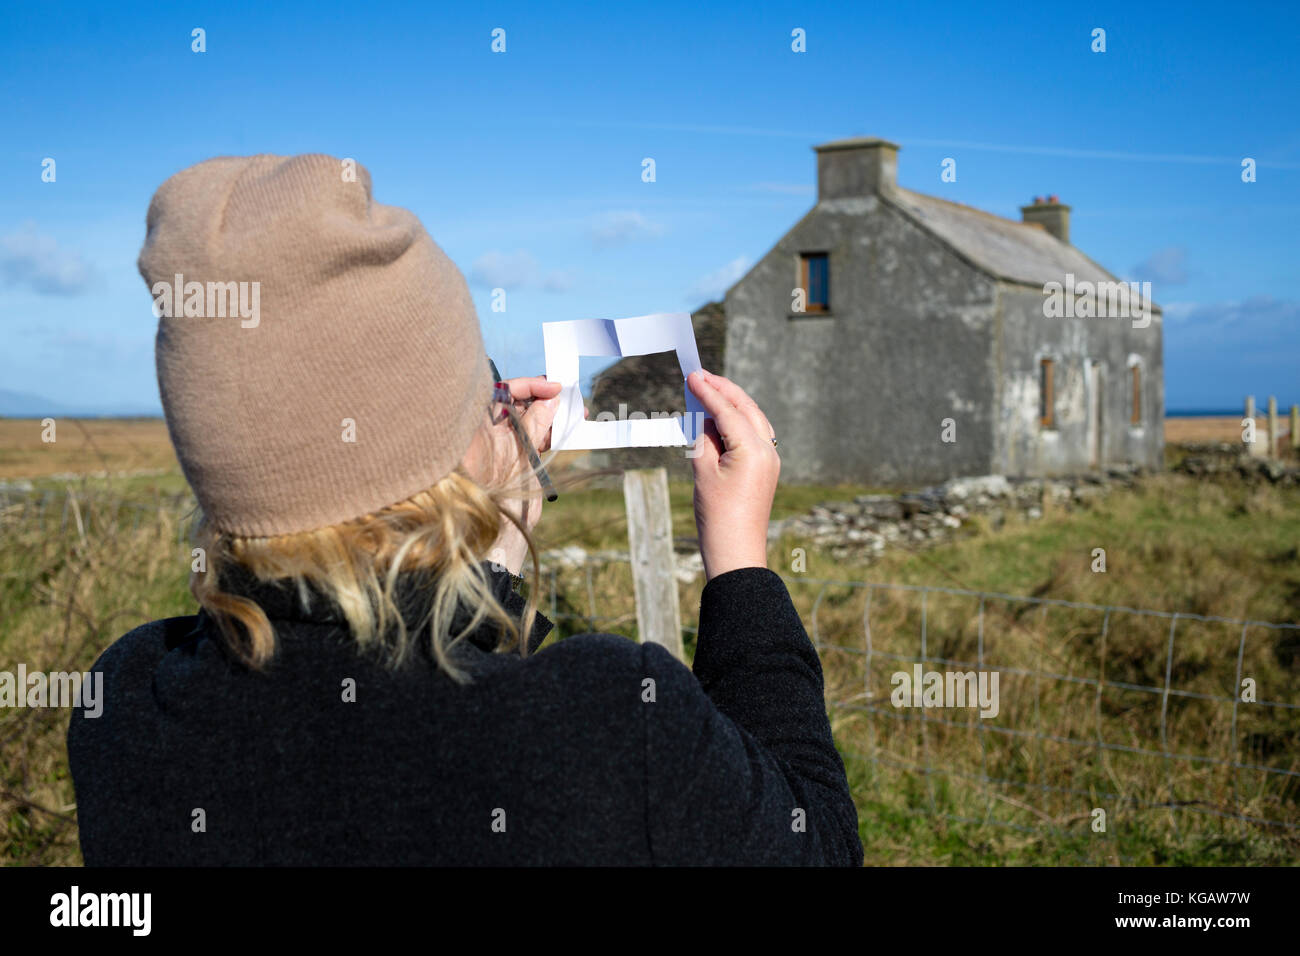 Woman artist framing scene with paper viewfinder Stock Photo